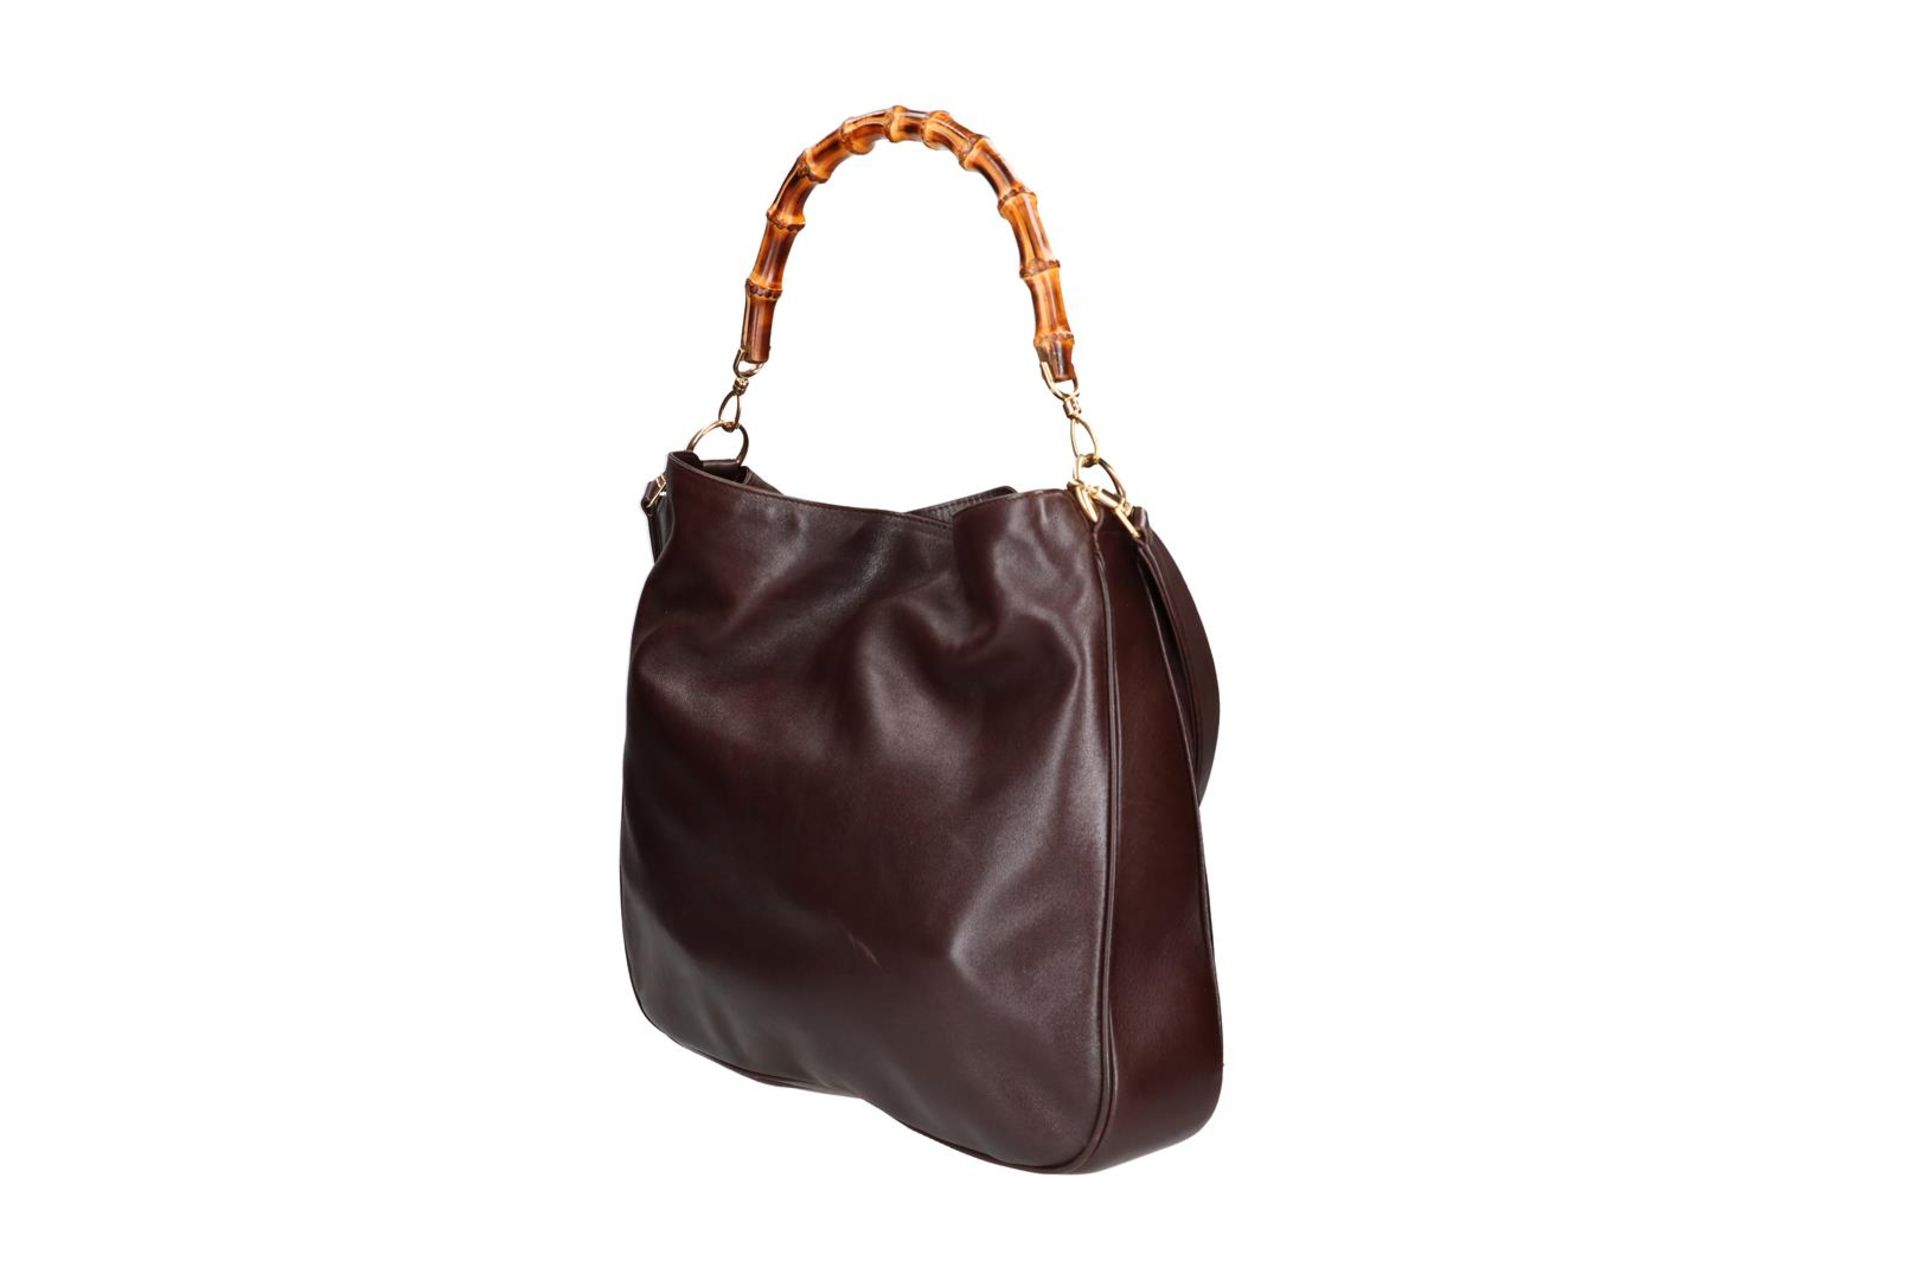 Gucci, brown leather tote bag, 'Bamboo', with leather shouldestrap and dust cover. H x W x D: 31 x 3 - Image 2 of 5